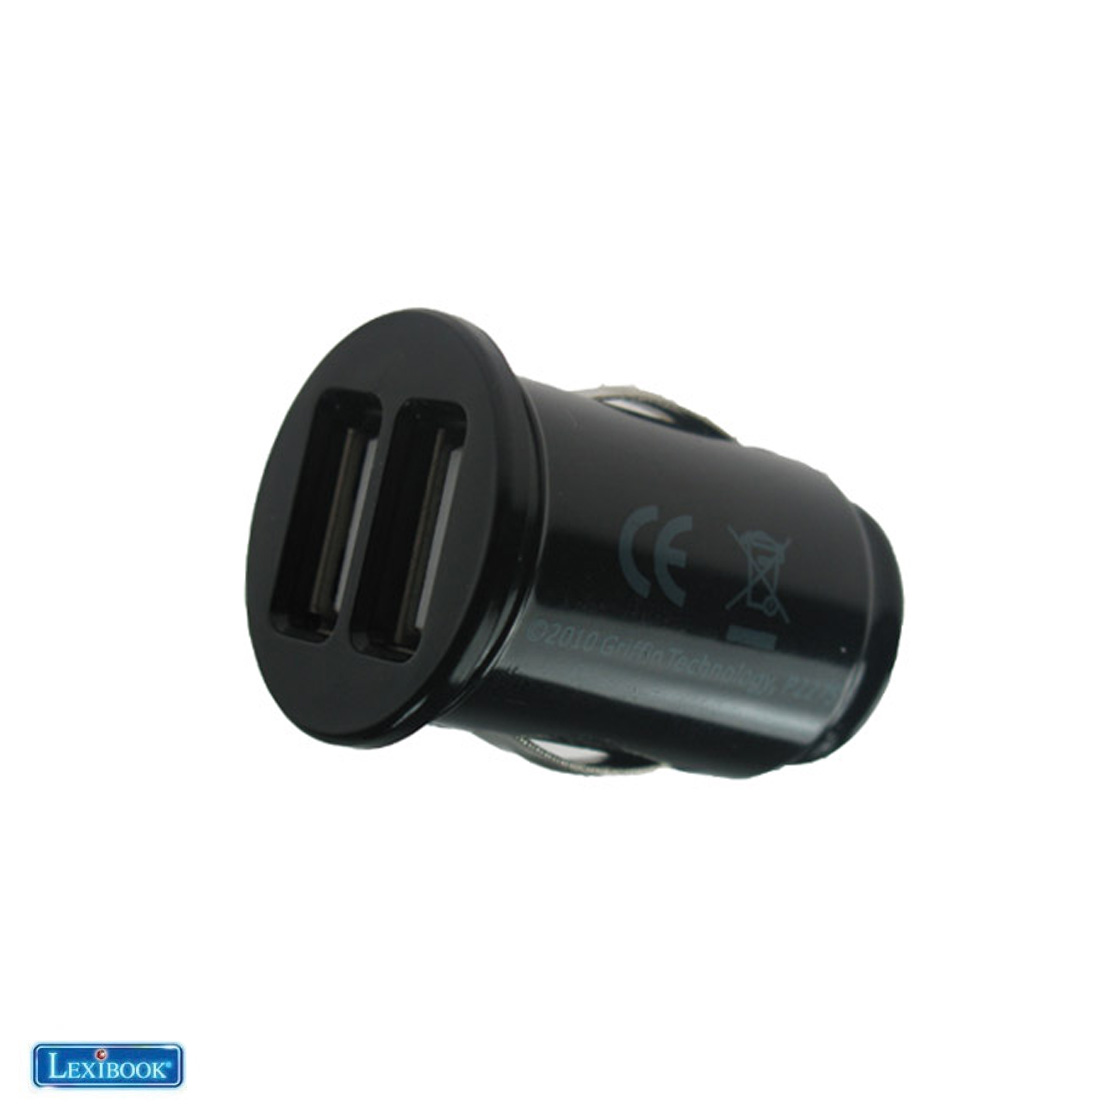 Lexibook USB Car Charger for Tablet_product